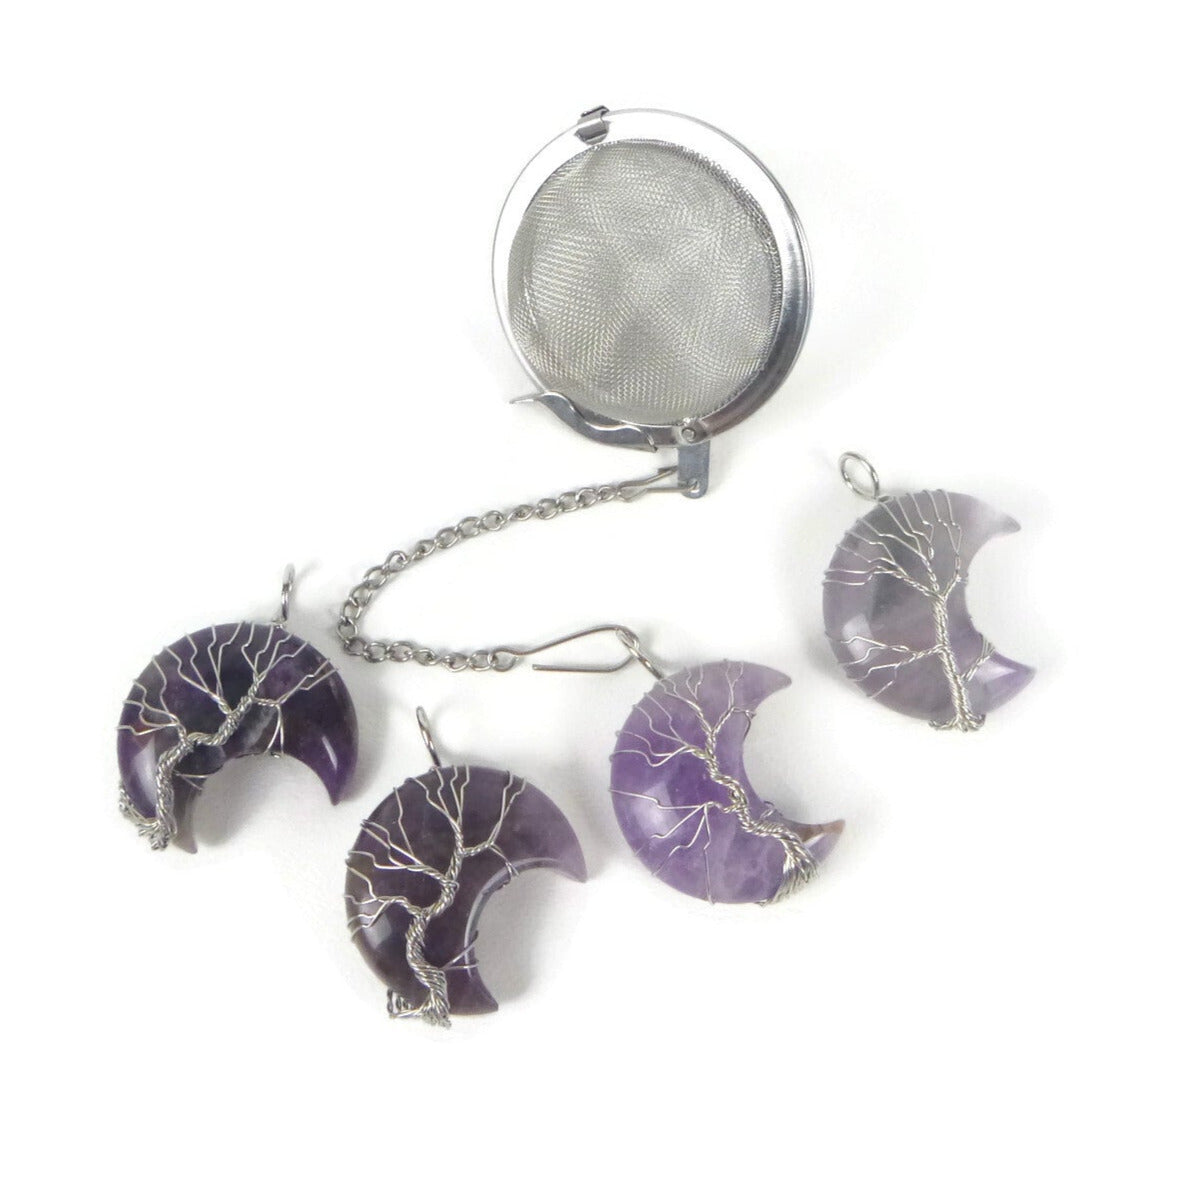 Tea Infuser with Amethyst Crescent Moon Charm